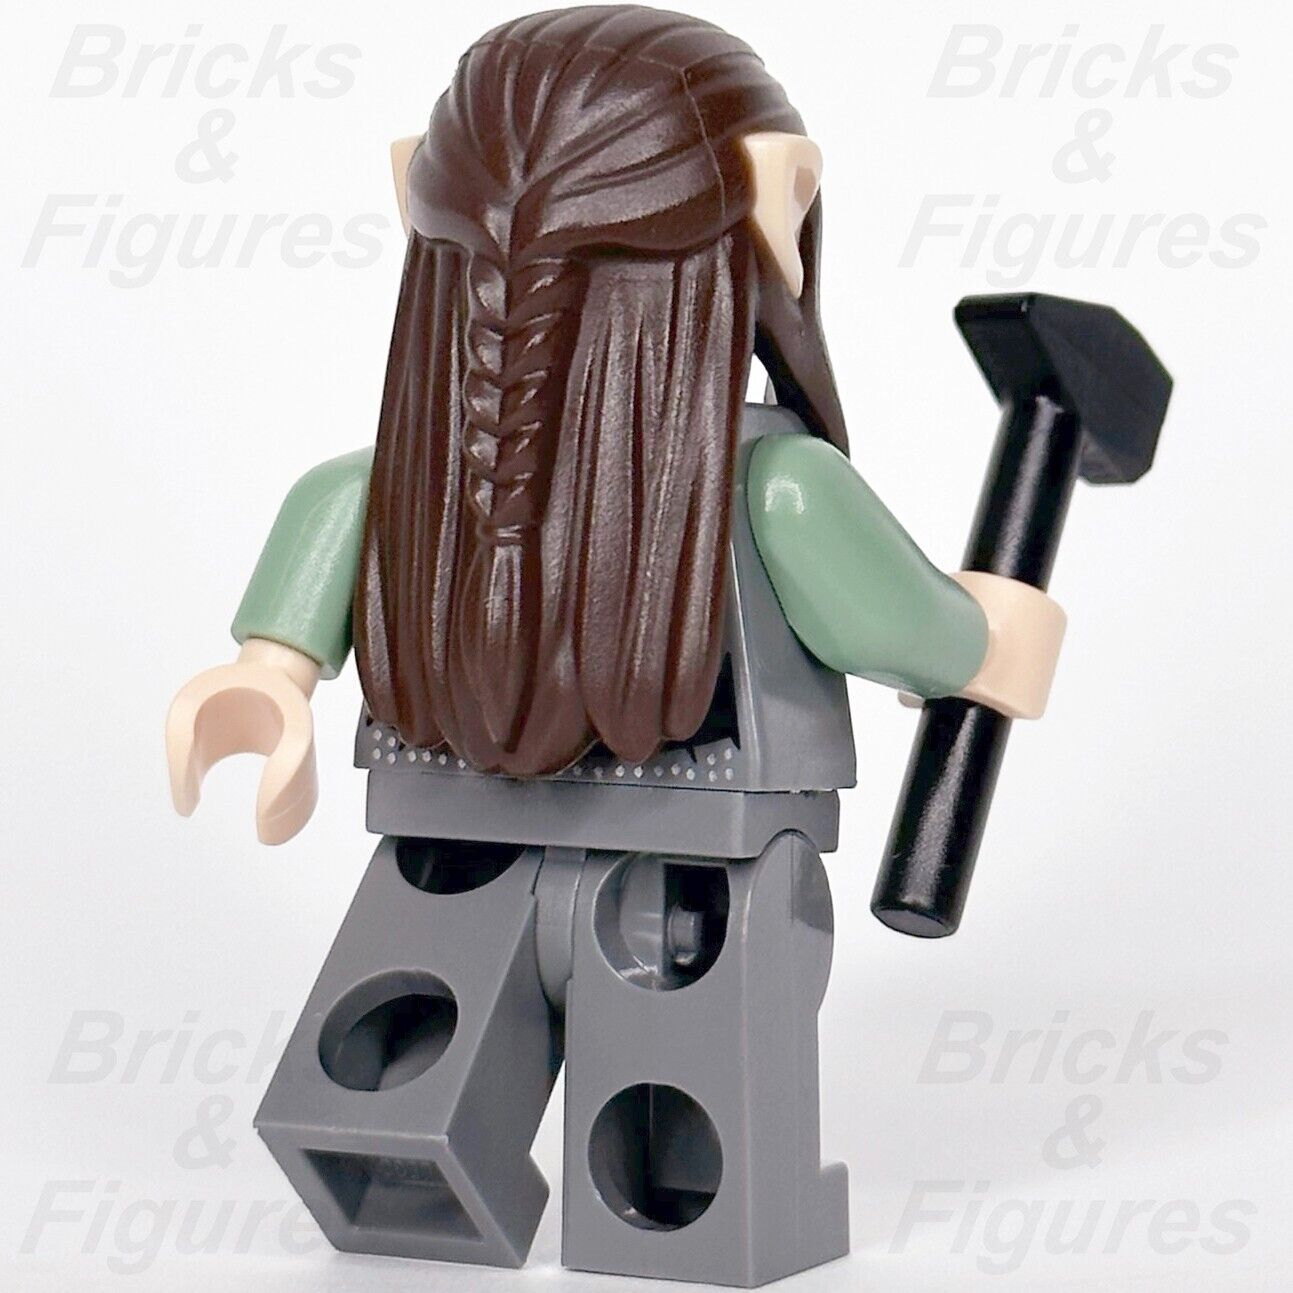 LEGO Rivendell Elf Minifigure The Hobbit & The Lord of the Rings 10316 lor122 - Bricks & Figures